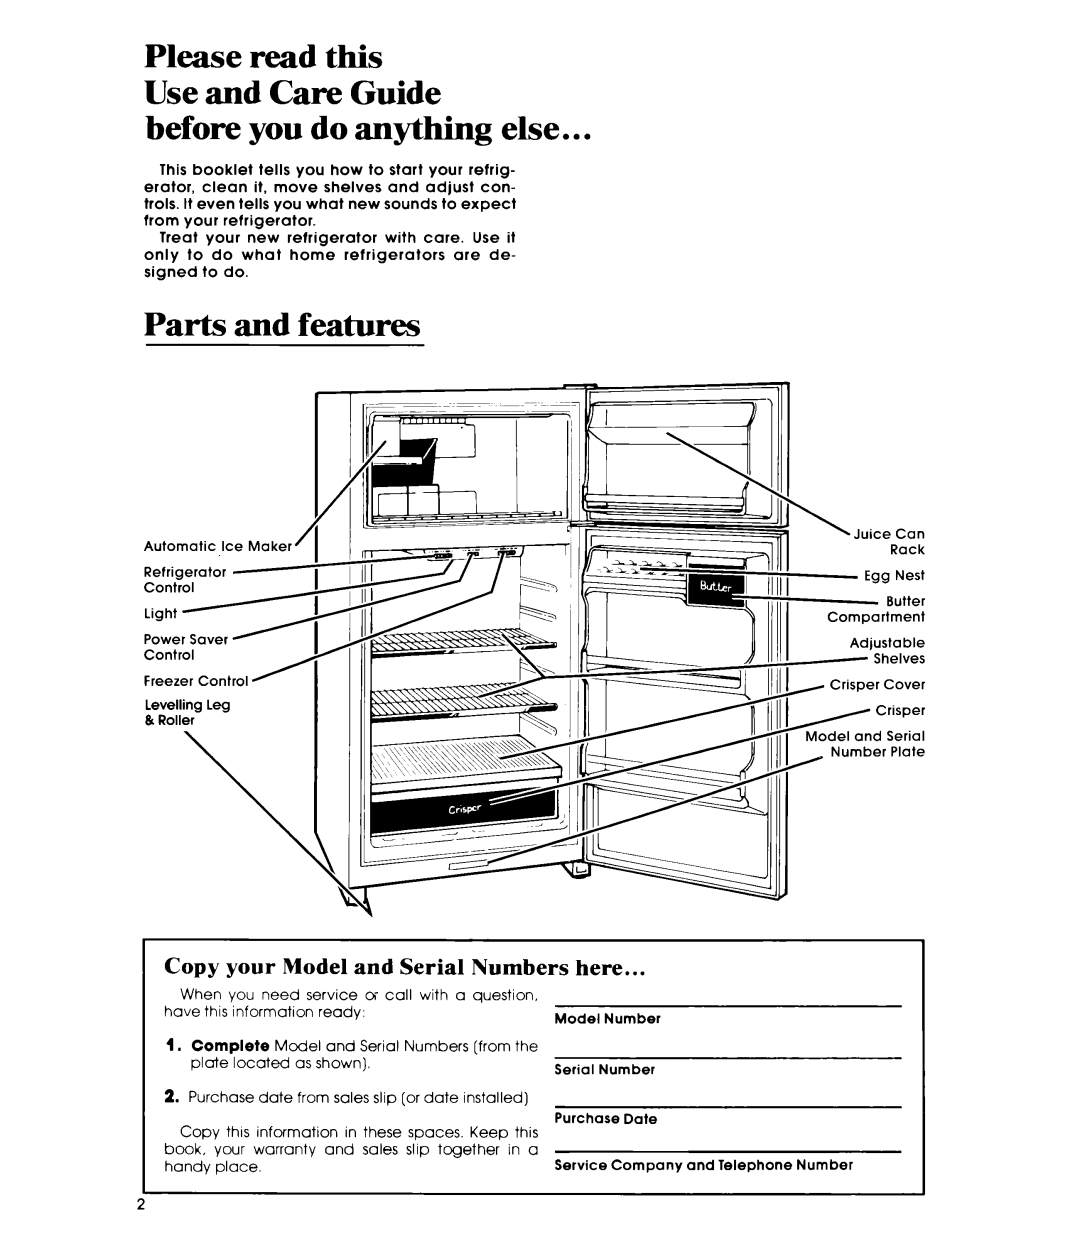 Whirlpool ETWM ws manual before you do anything else, Parts and features, Please read this Use and Care Guide 